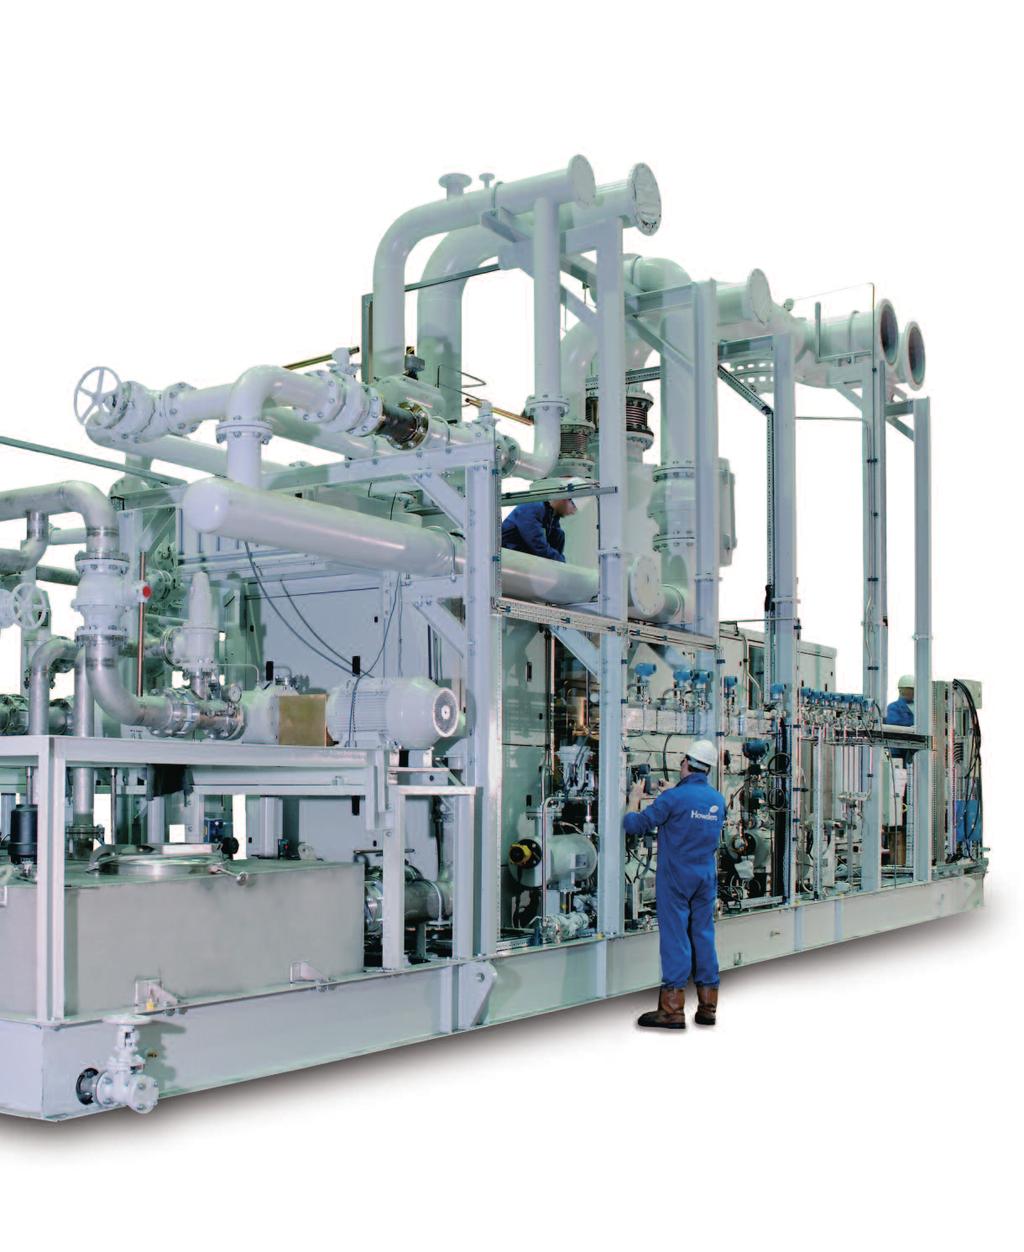 OIL FREE COMPRESSORS ARE USED IN PROCESSES SUCH AS VAPOUR RECOMPRESSION,